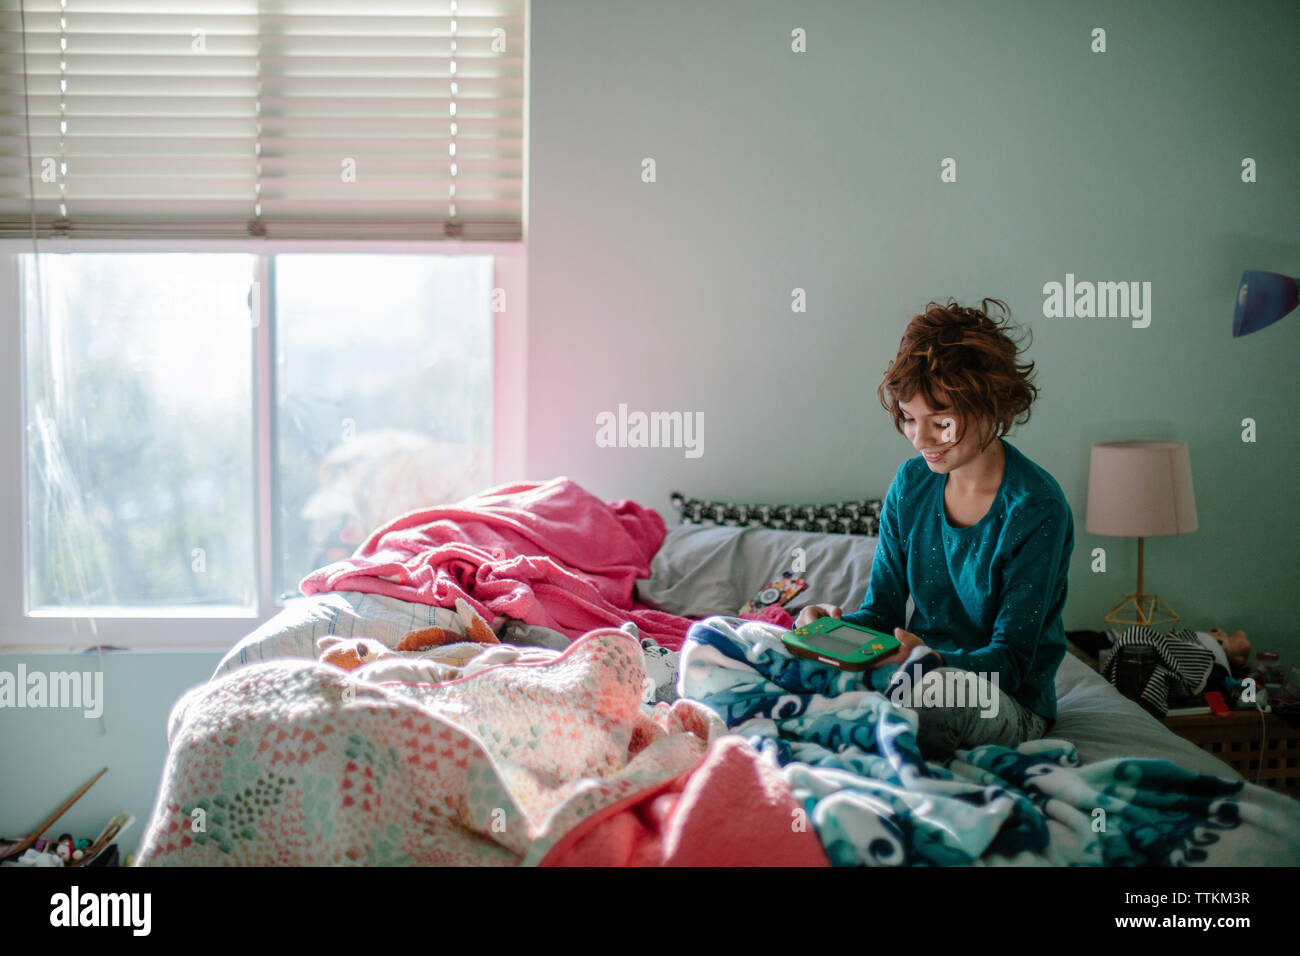 Smiling girl playing video game while sitting on bed at home Banque D'Images